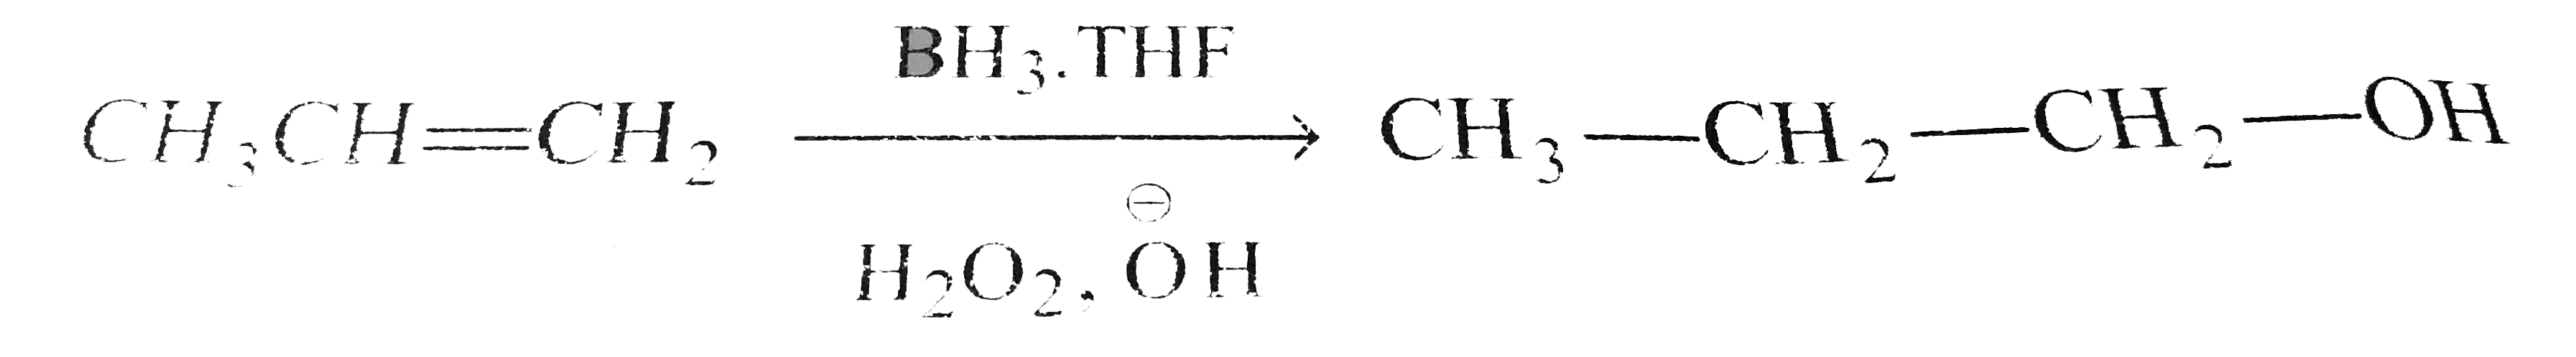 Hydroboration oxidation reaction is a process of addtition of H(2)O accroding to Anti-Markownikoff's rule      Reaction is regioselective.Regioselectivity off reaction is increeased by using hindered boranes.   THF (Tetrahydrofuran) is used to control reactivity of borne.